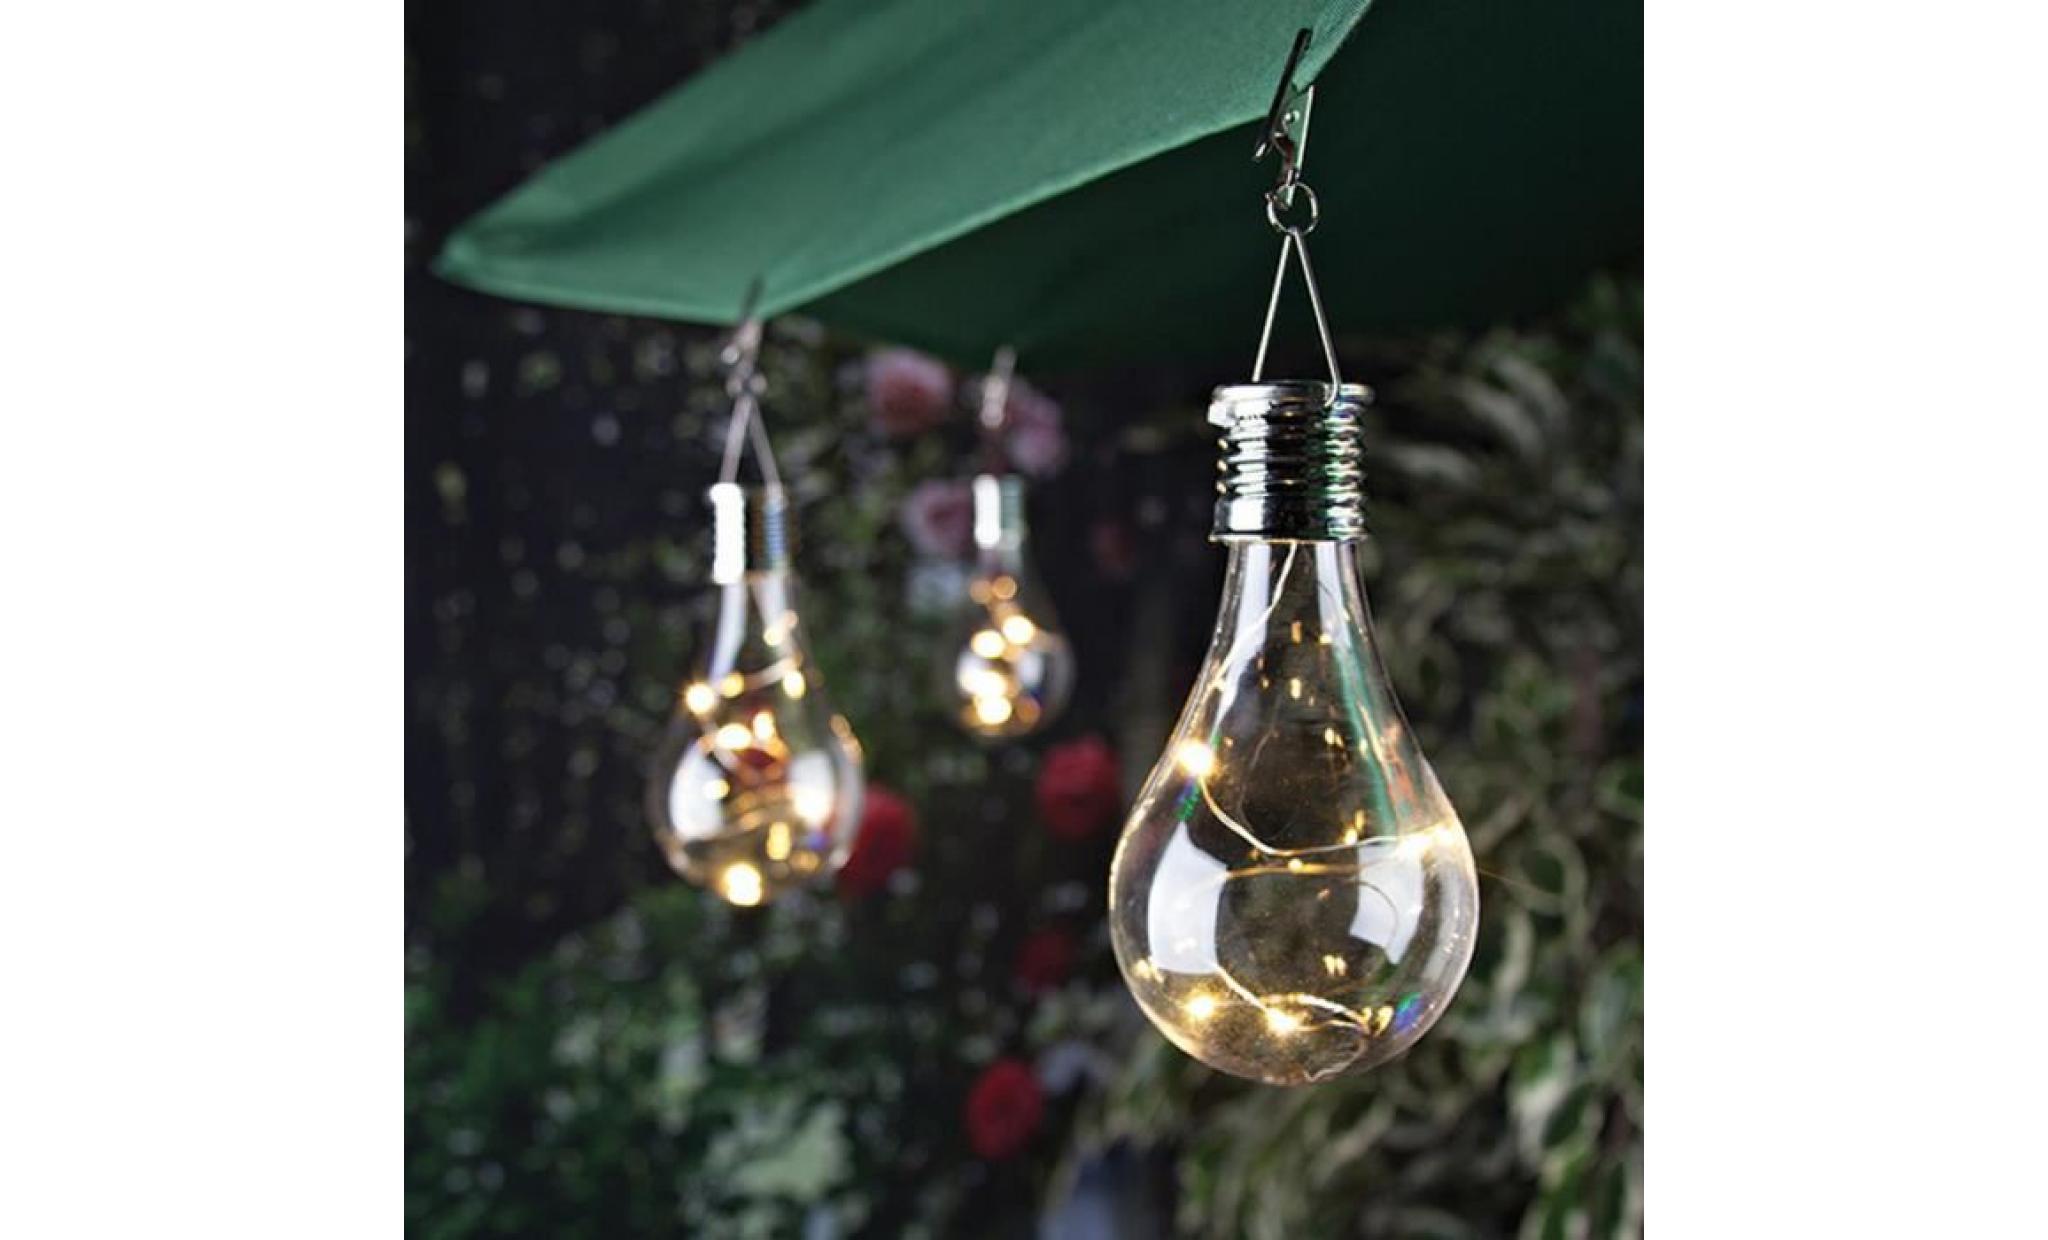 waterproof solar rotatable outdoor garden camping hanging led light lamp bulb  qinhig968 pas cher